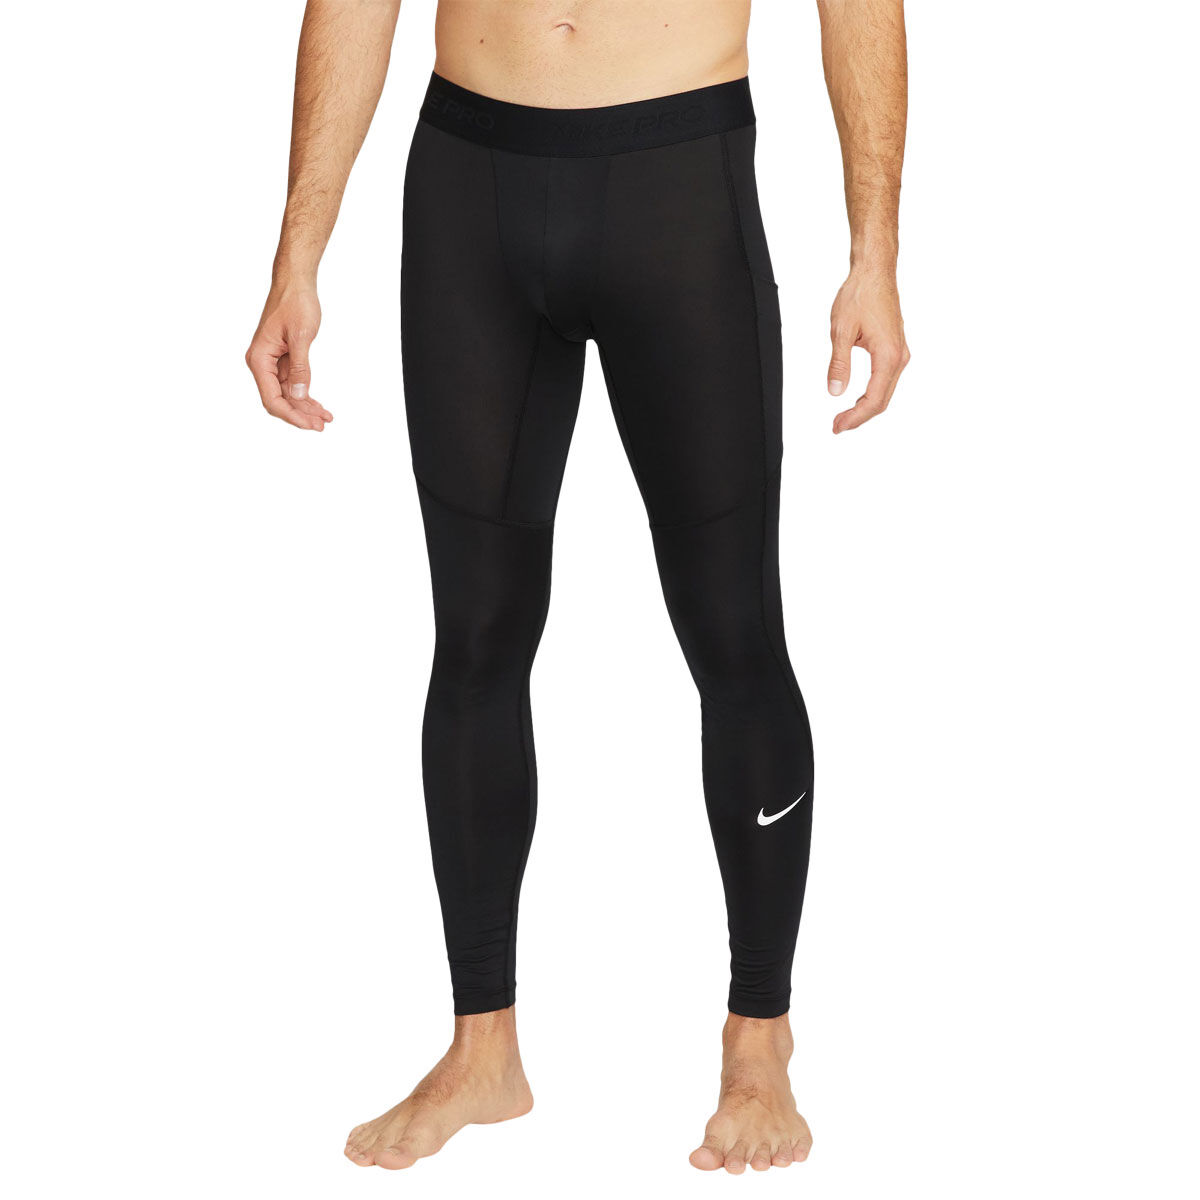 Authentic Nike Pro Hypercool Compression Athletic Shirt, Men's Fashion,  Activewear on Carousell